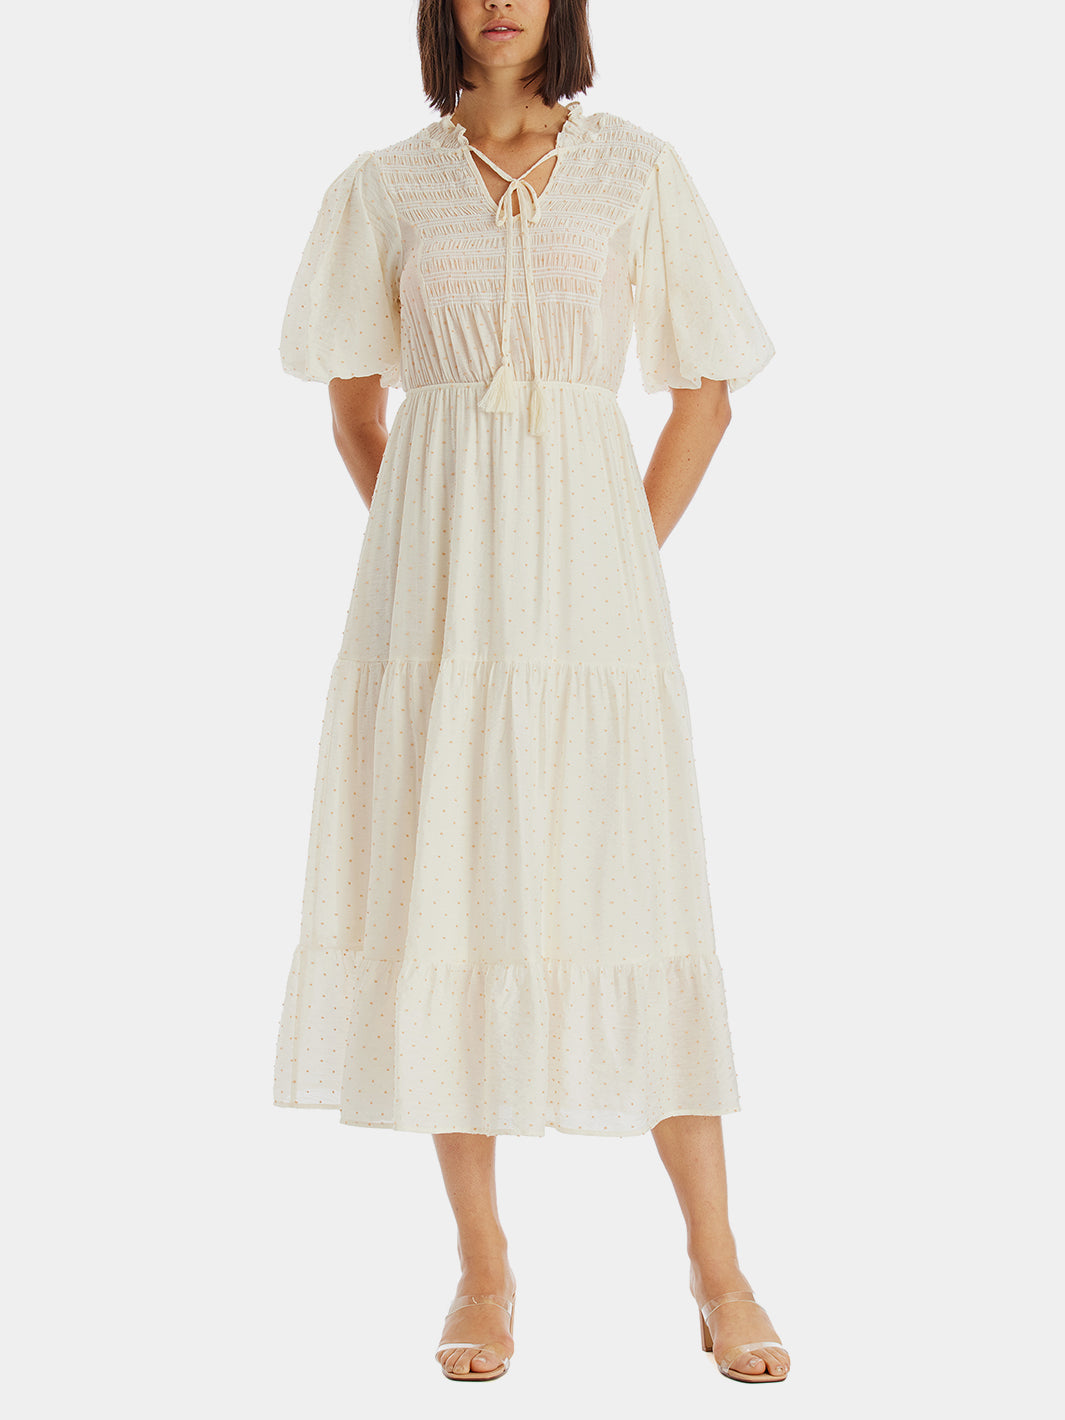 Dreamy Dresses – Lord & Taylor